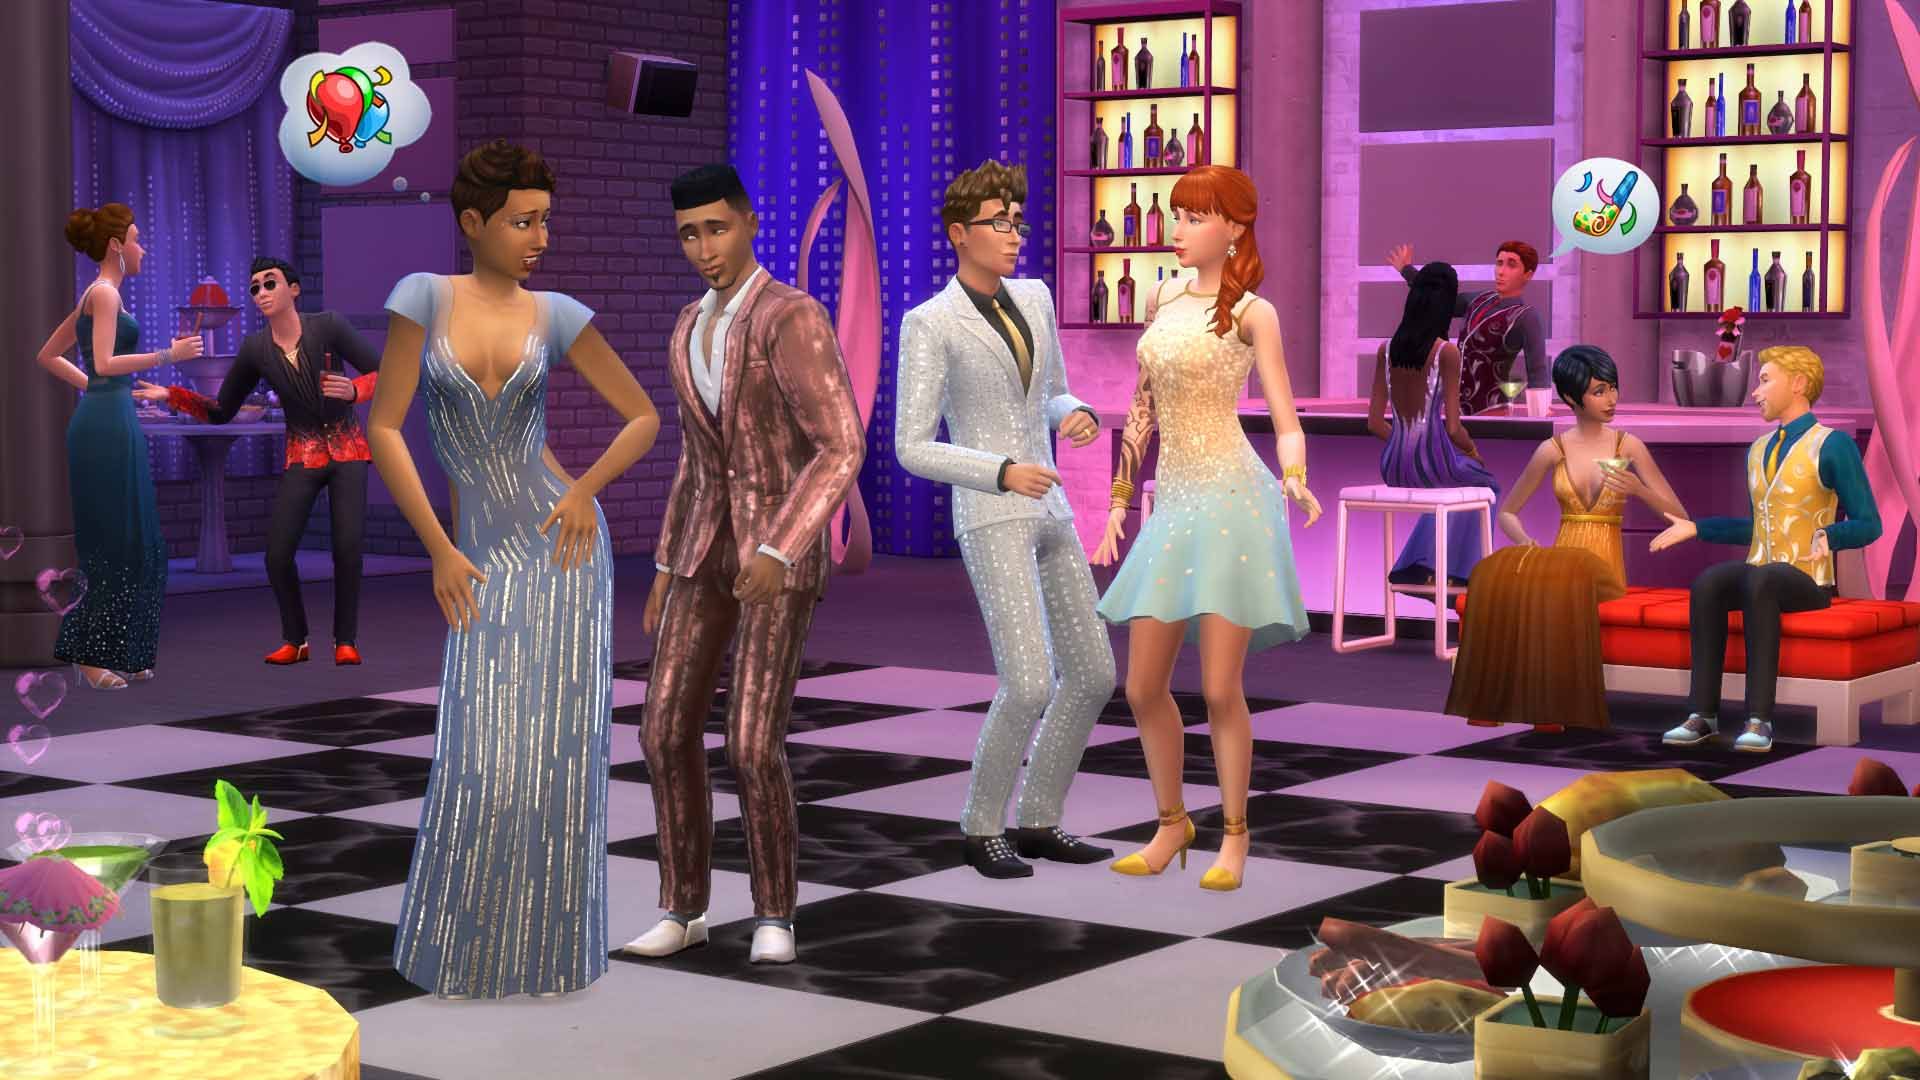 original 2 Download The Sims 4 Luxury Party for PC